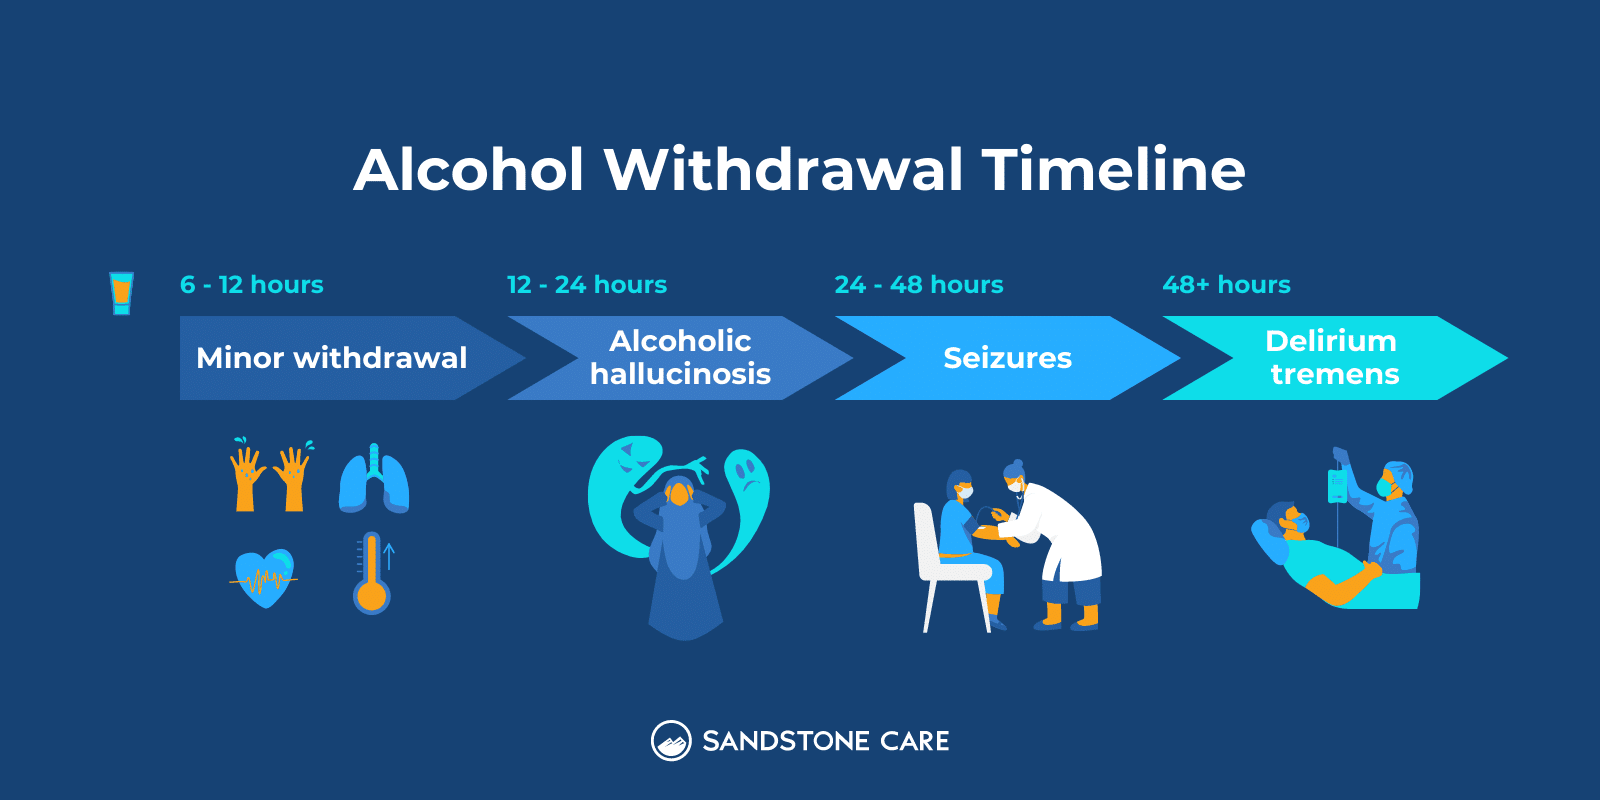 https://www.sandstonecare.com/wp-content/uploads/2023/01/Alcohol-Withdrawal-Timeline-Infographic.png